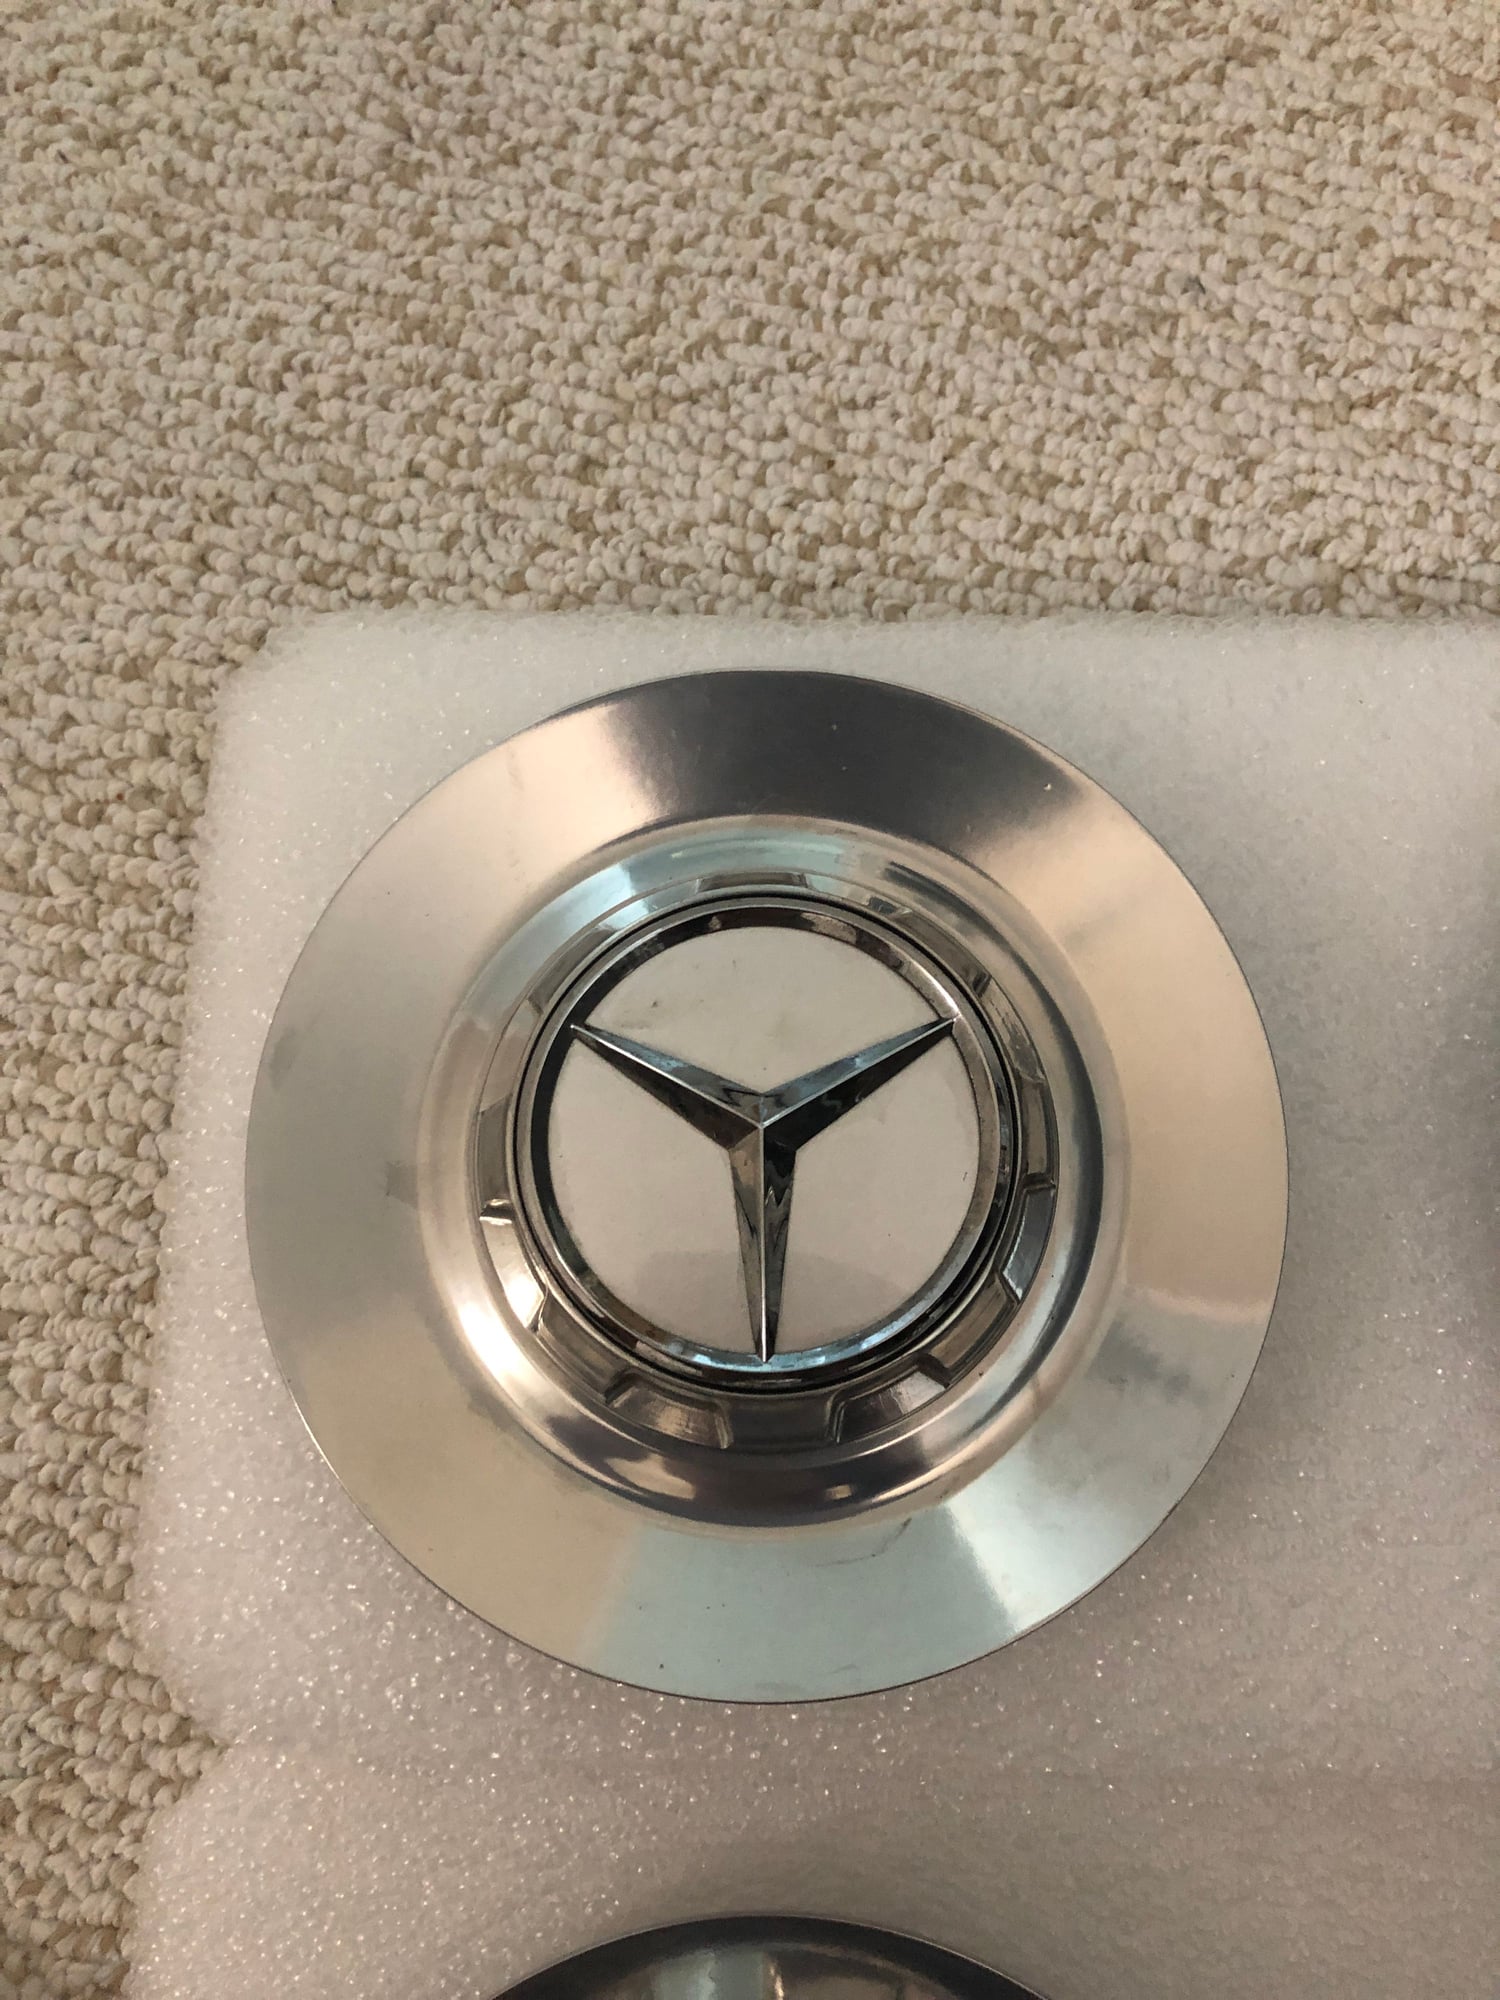 Wheels and Tires/Axles - For Sale: 4 OEM/Stock Chrome Hub Caps - Used - All Years Mercedes-Benz C63 AMG S - Chicago, IL 60056, United States